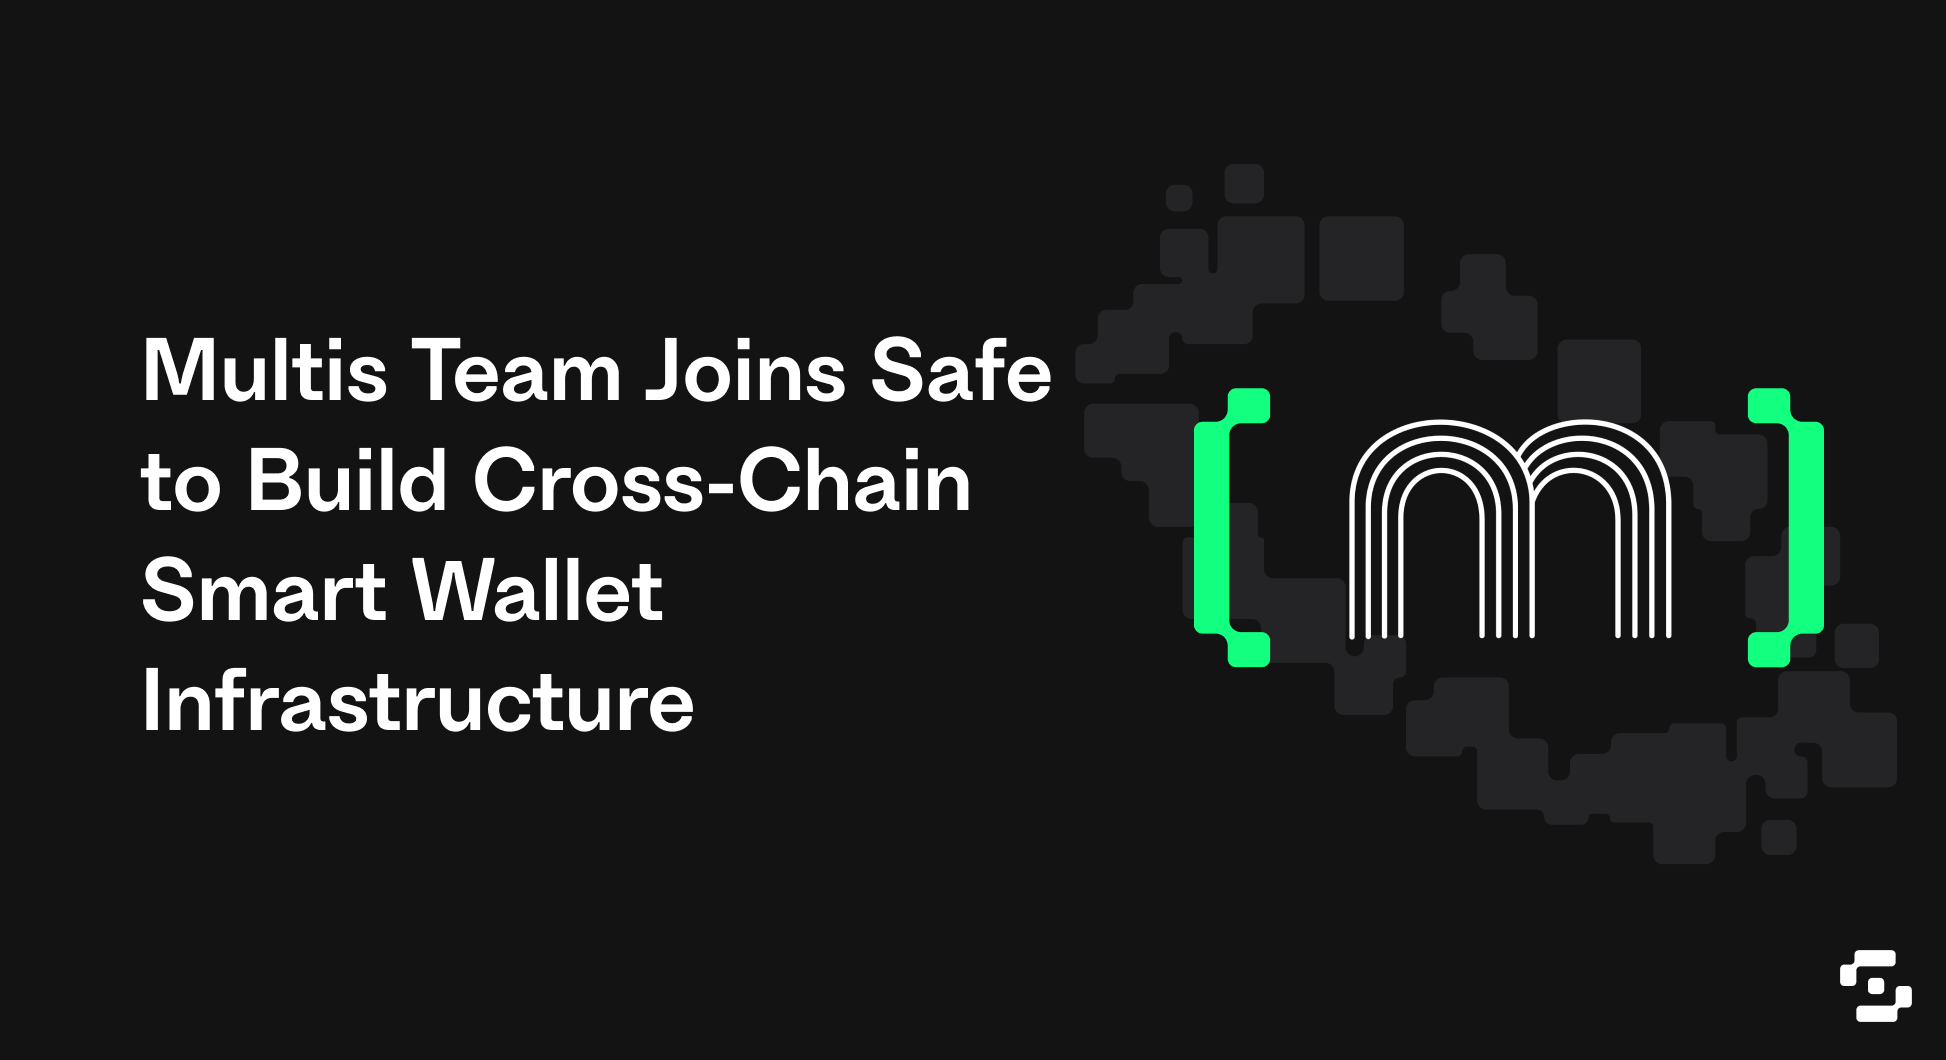 Multis Team Joins Safe to Build Cross-Chain Smart Wallet Infrastructure